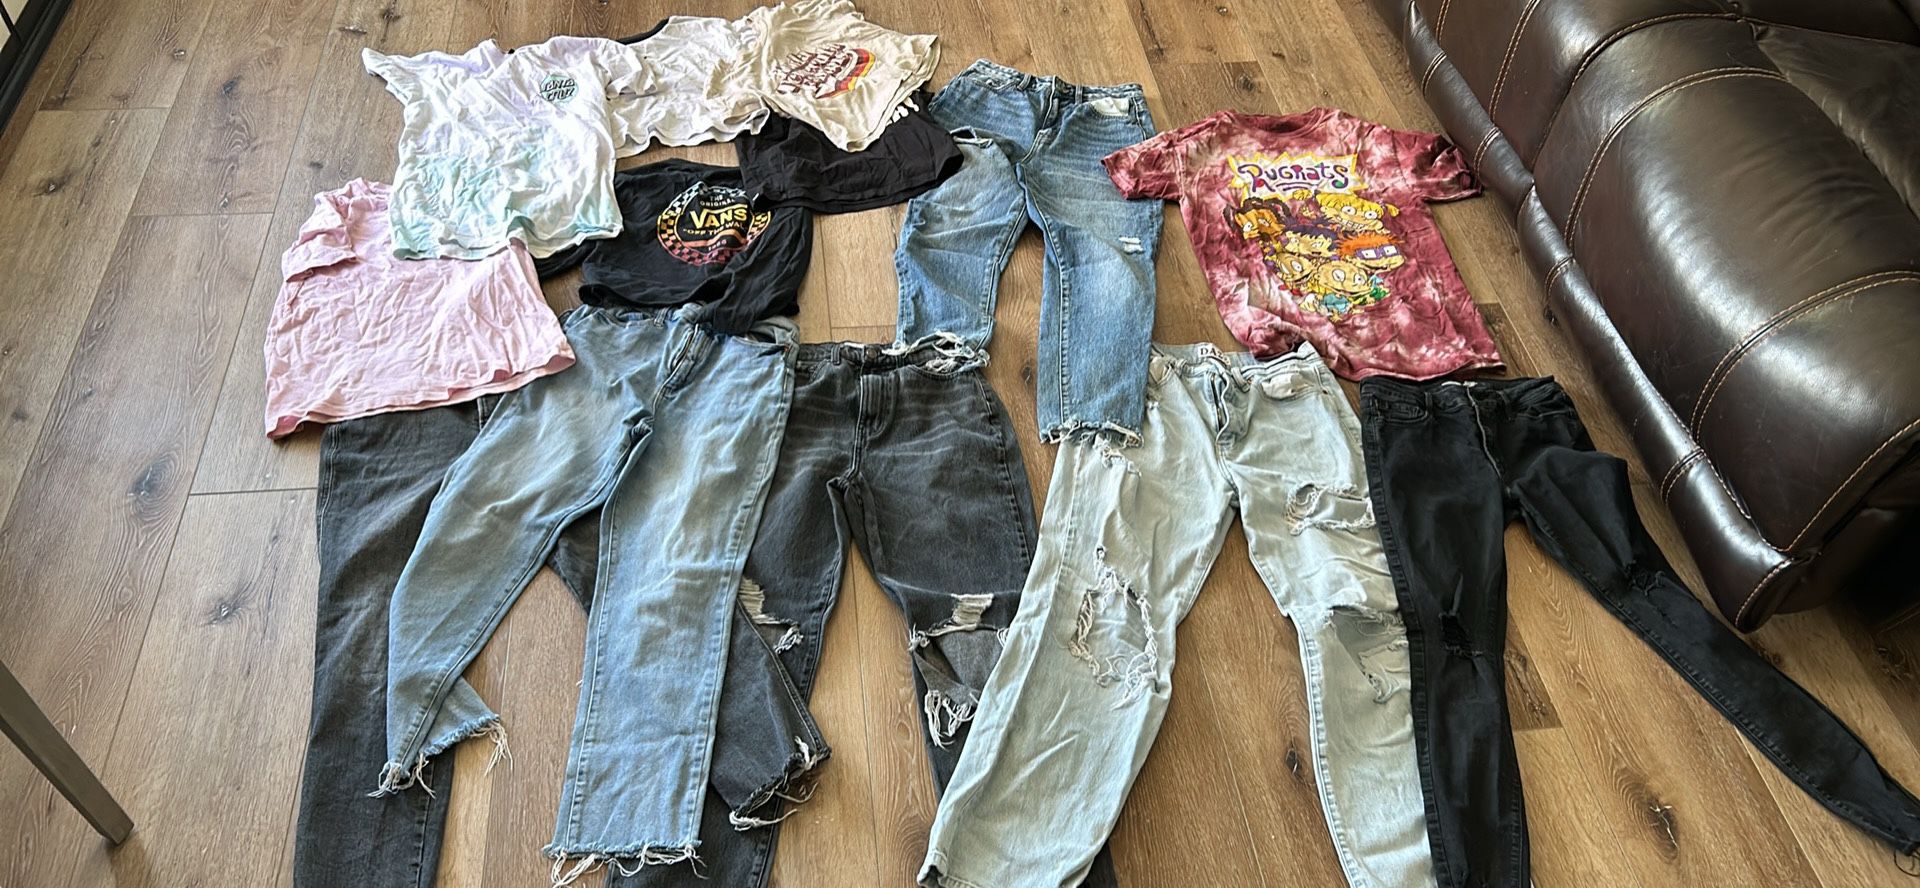 Tons Of Teen Clothes Size Small And Medium Jeans Size 27, 28 And Size 6 